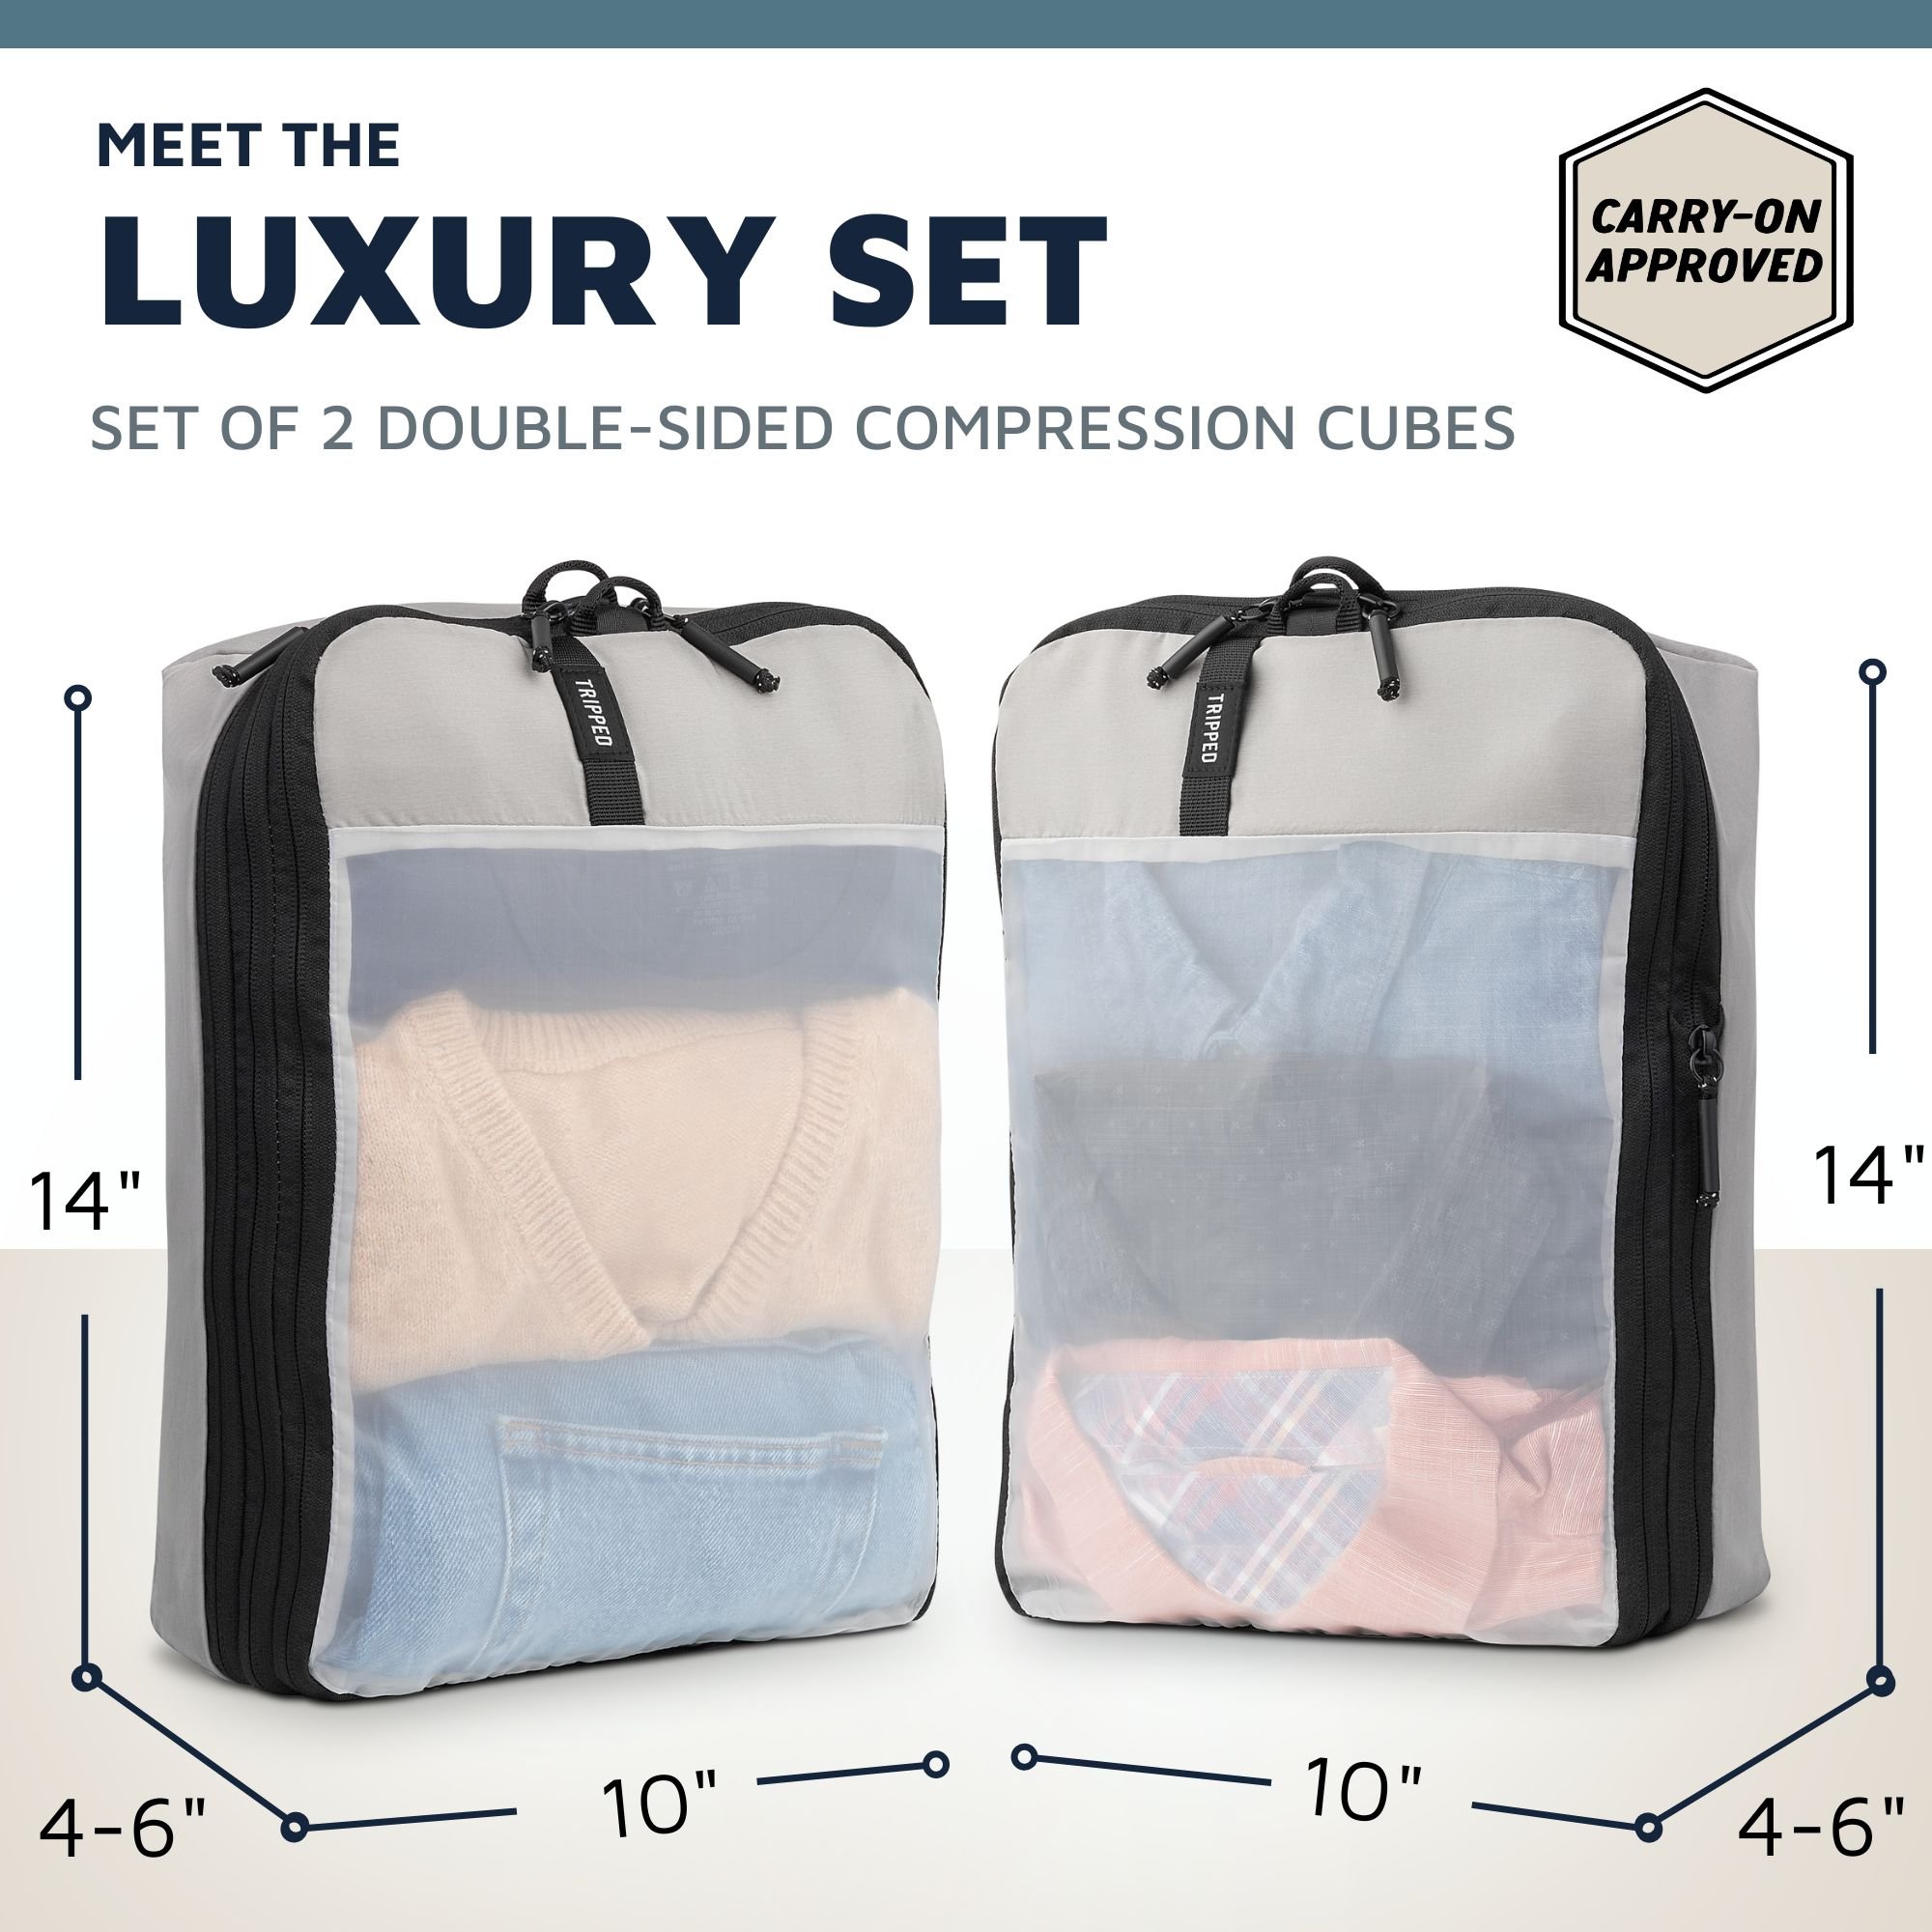 luxury compression packing cubes for business travel carry on friendly.jpg